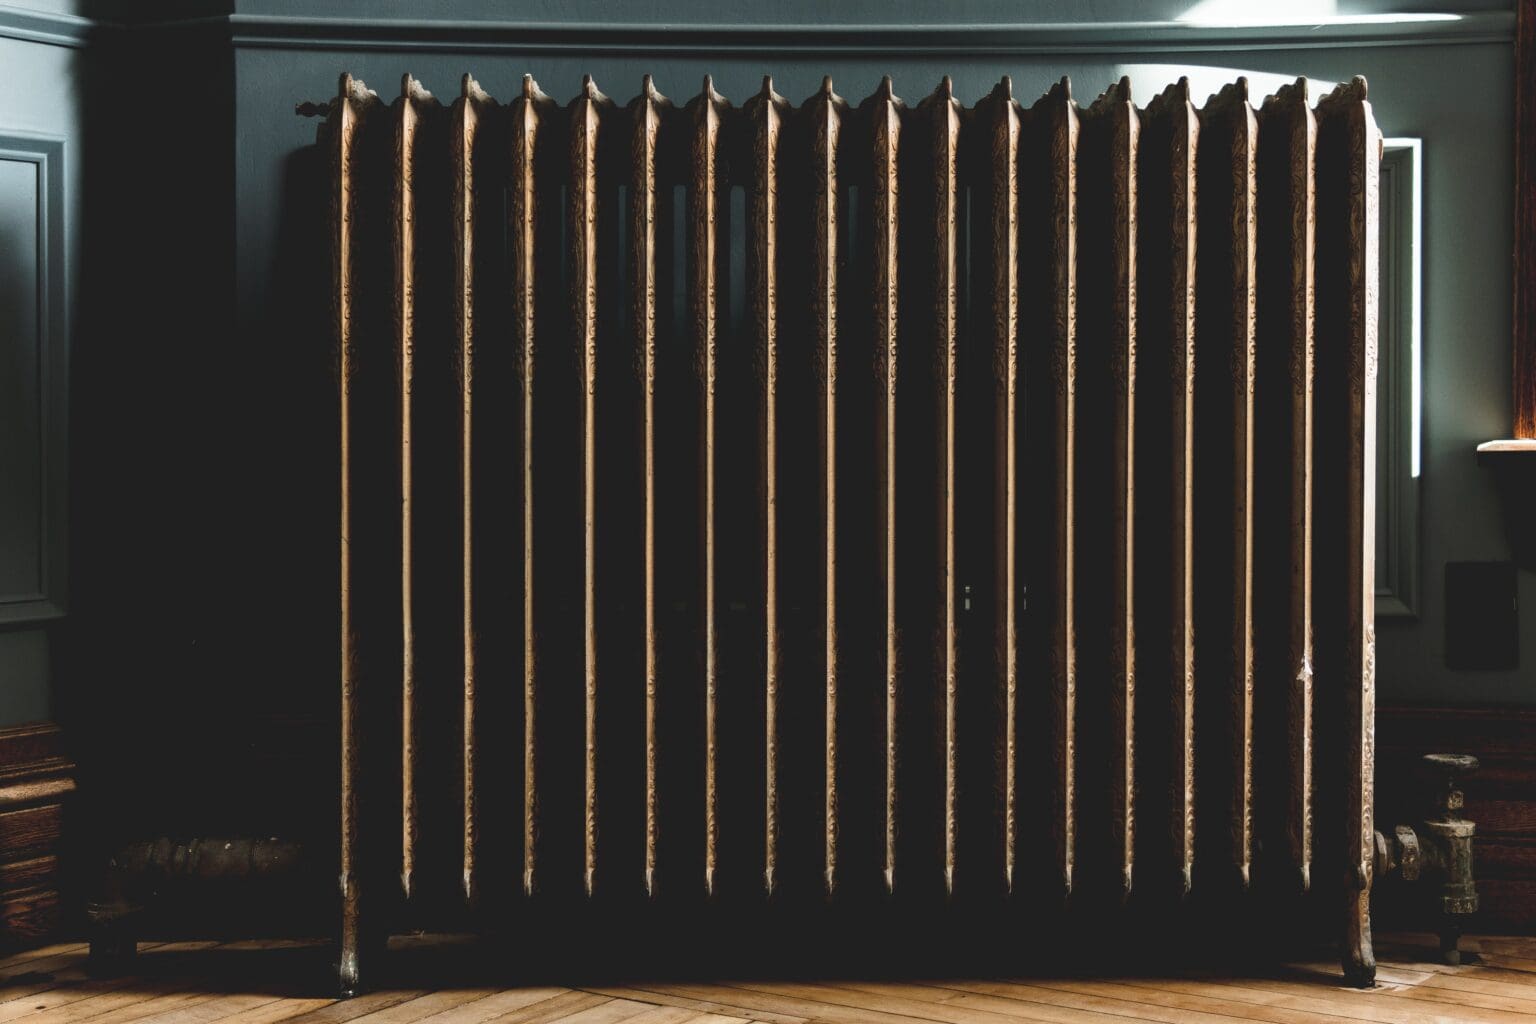 Vintage radiator against a dark wall in a dimly lit room, showcasing a classical design with prominent vertical ribs.